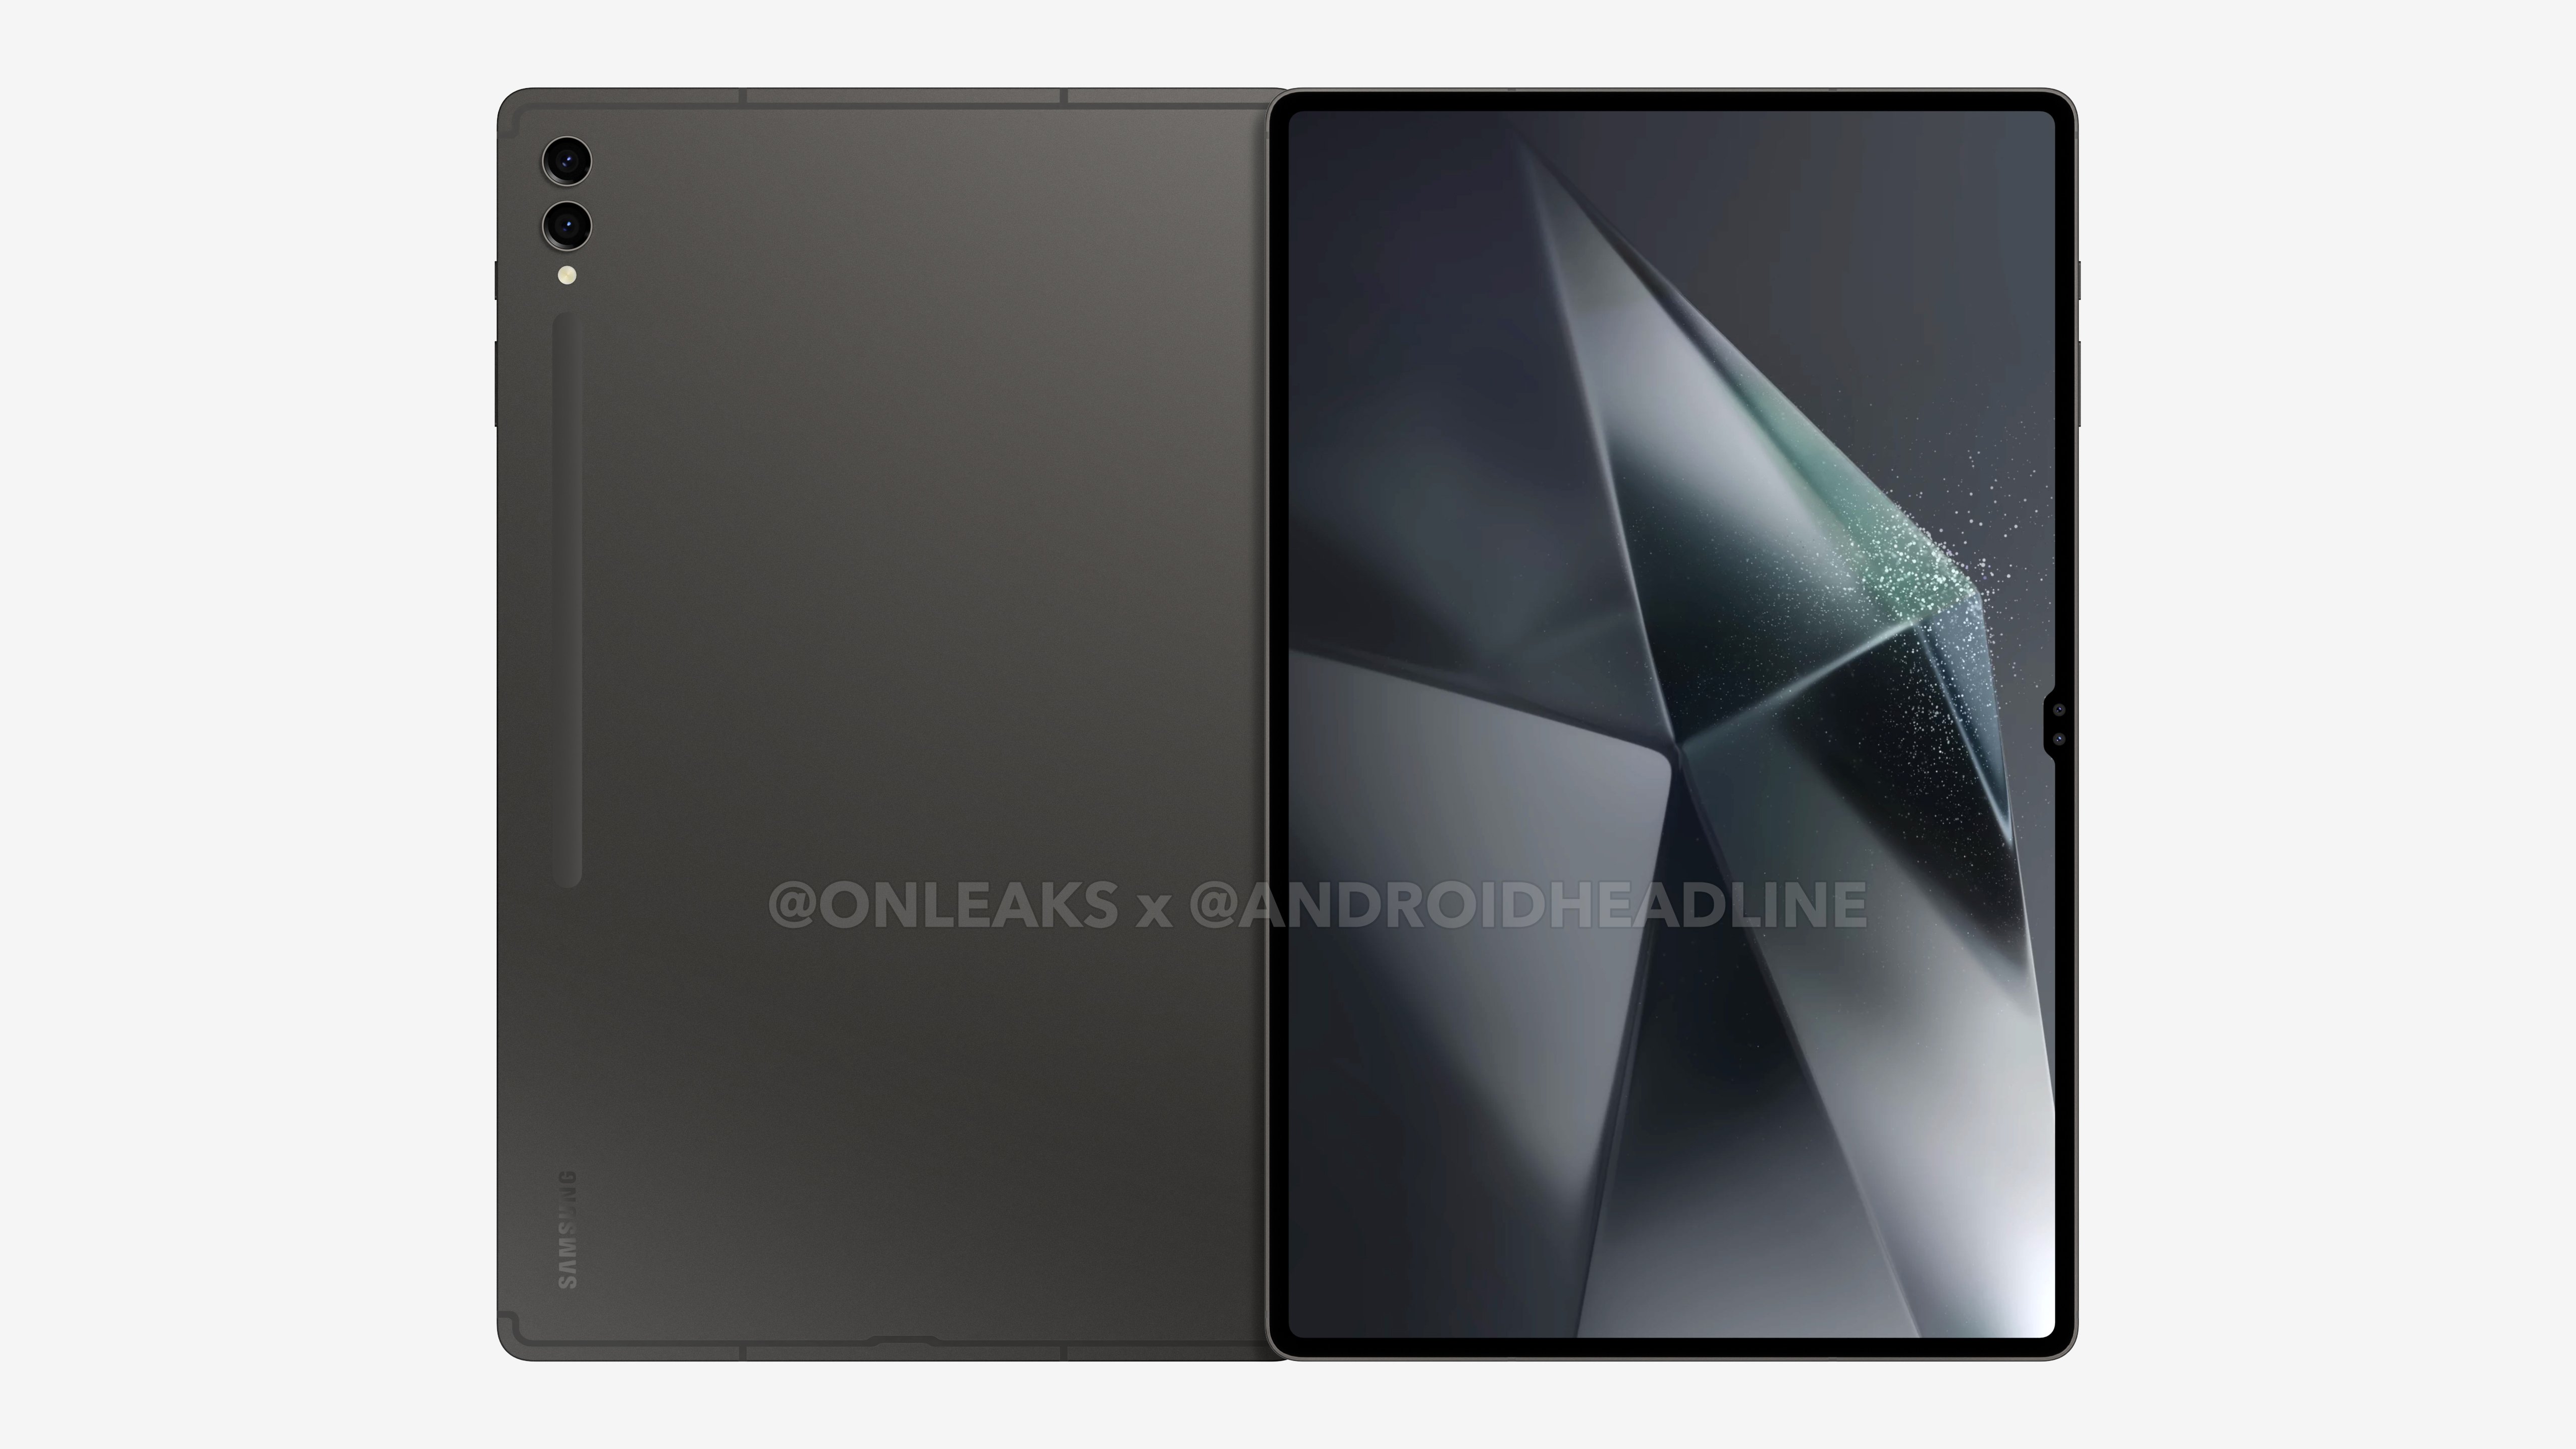 Samsung Galaxy Tab S10 Ultra: The new renders do not reveal any major design changes